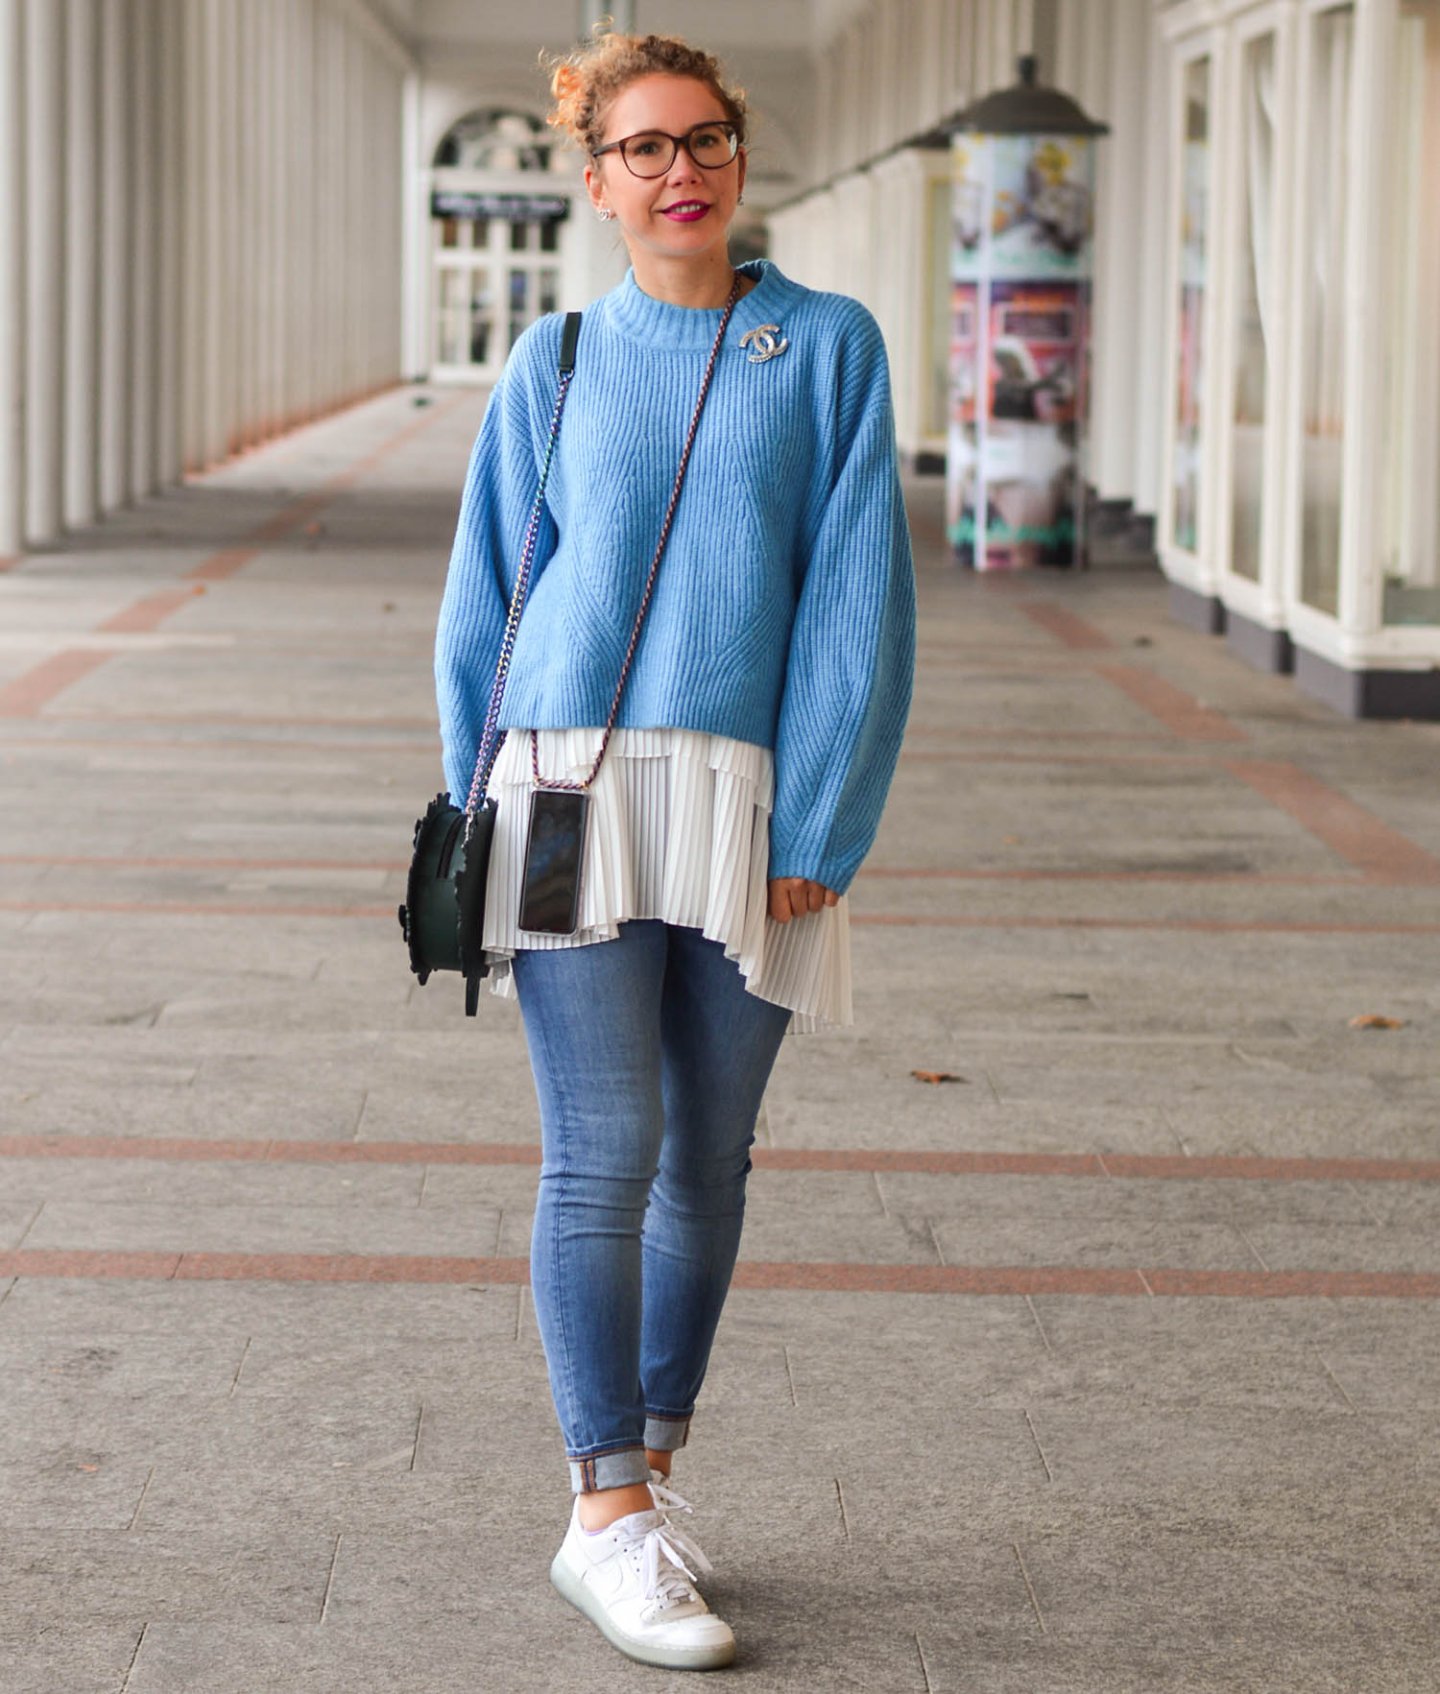 Baby-Blue-Sweater-Longbluse-Nike-Sneakers-Casual-Winter-Outfit-Kationette-Fashionblogger-Germany